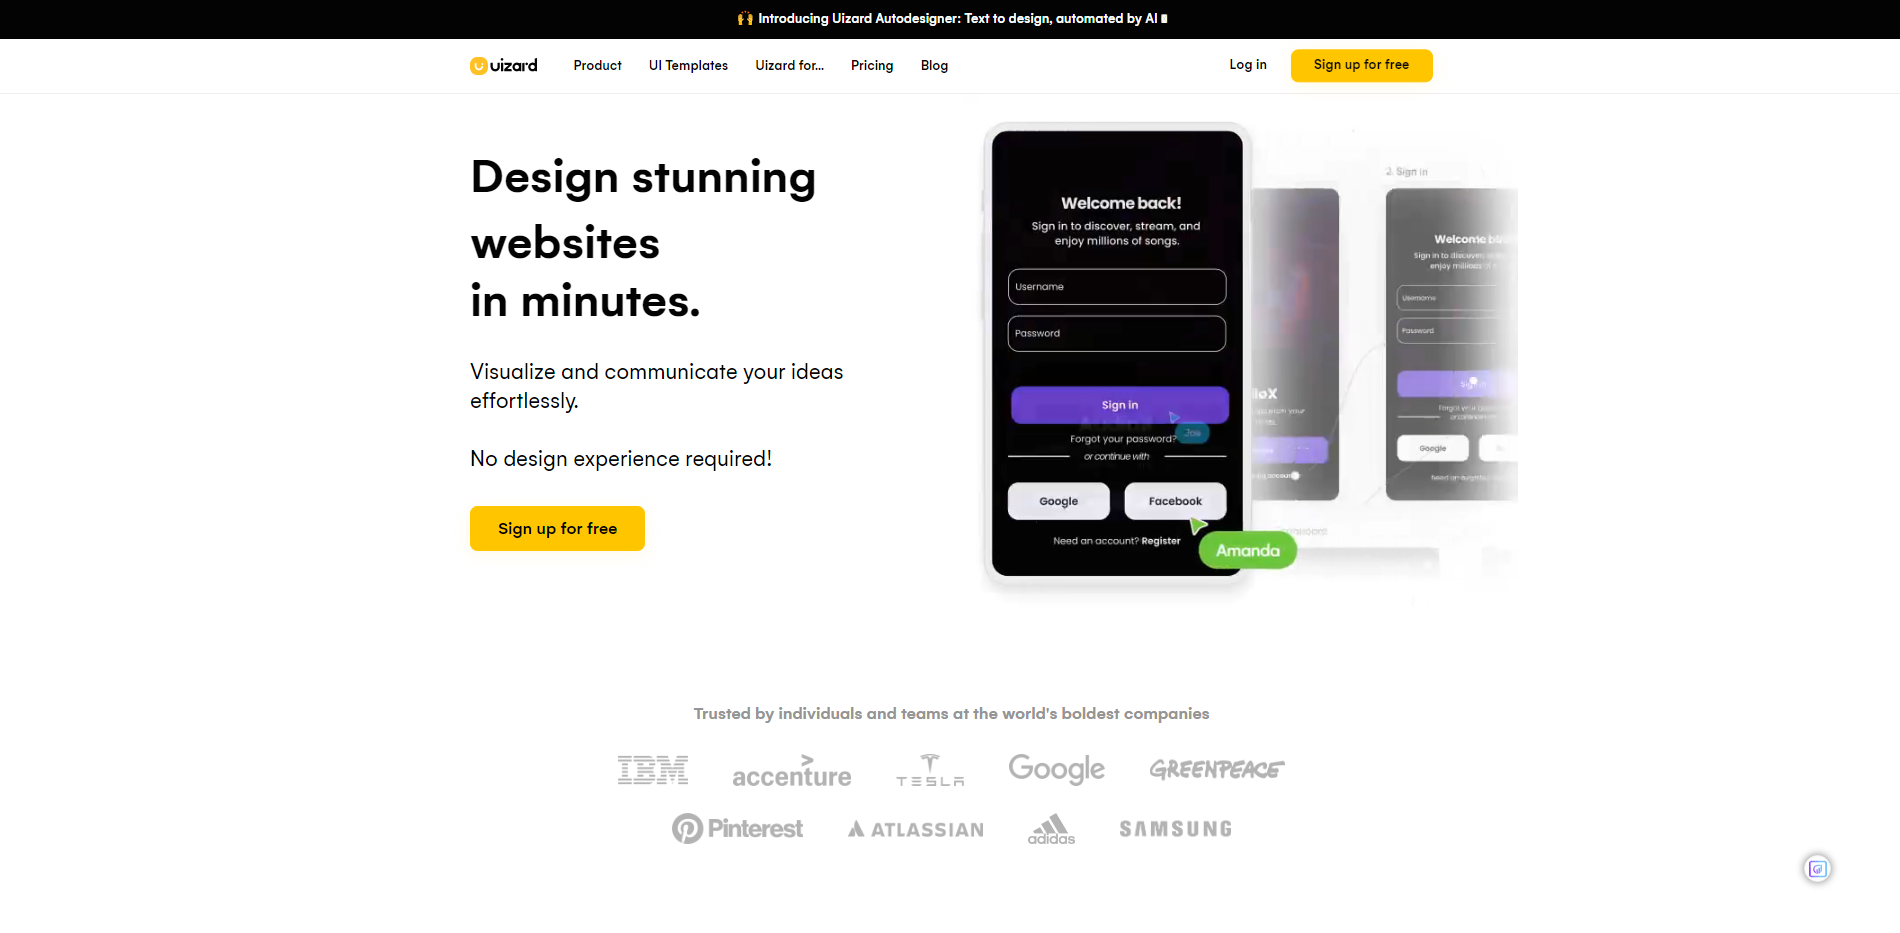 Uizard's homepage to create websites, wireframes, web app and UI designs with AI in seconds